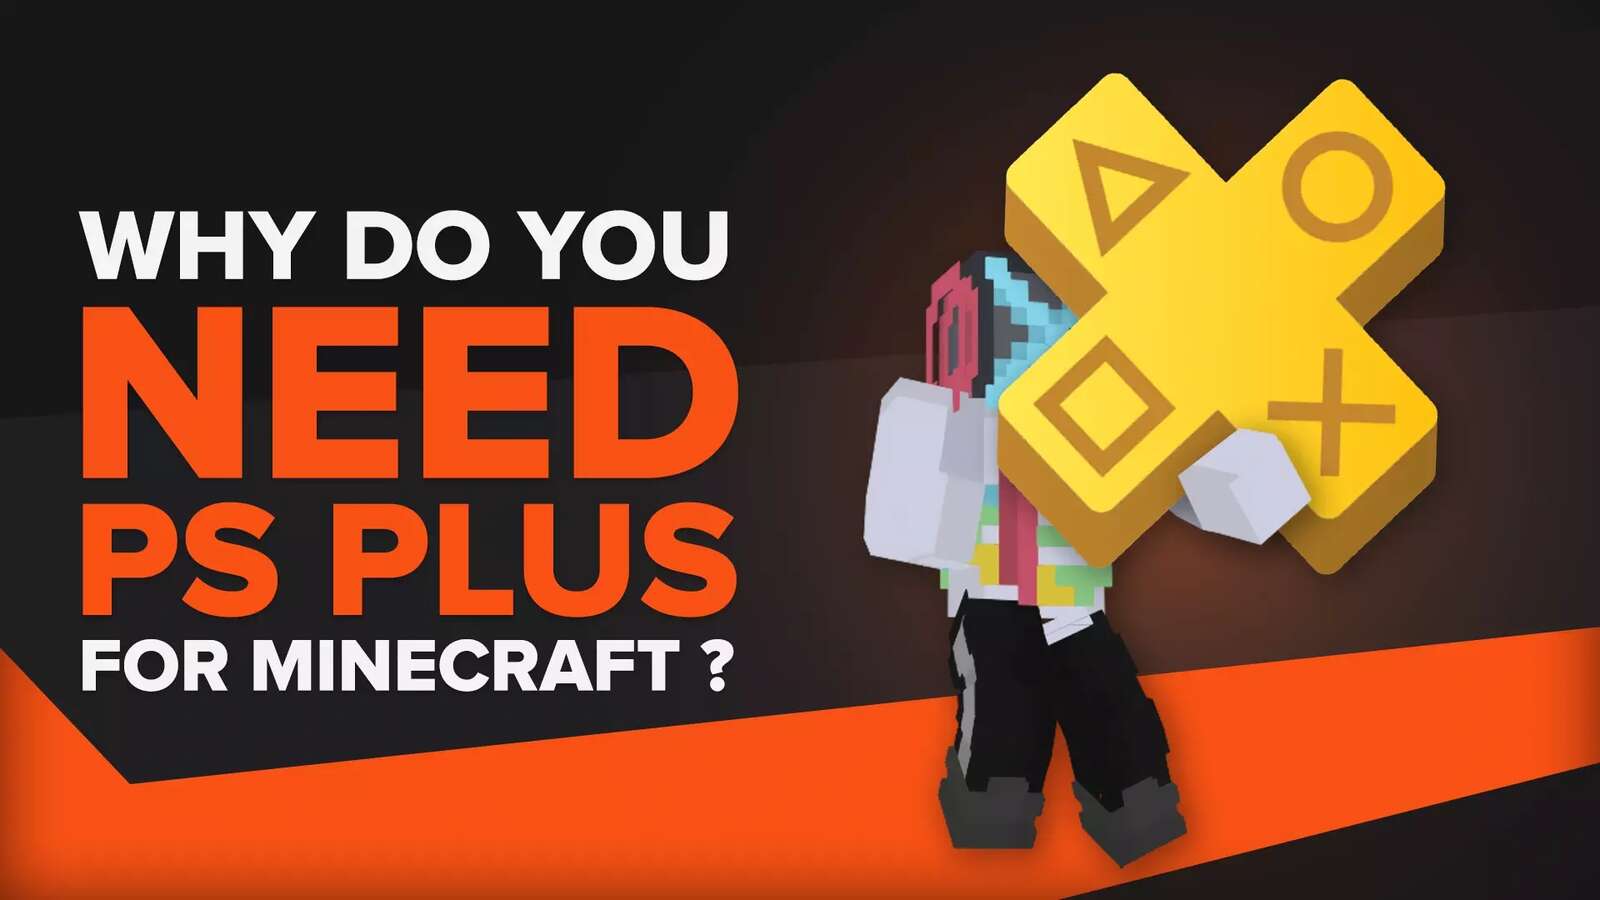 Why Do You Need PS Plus for Minecraft? [Explained]